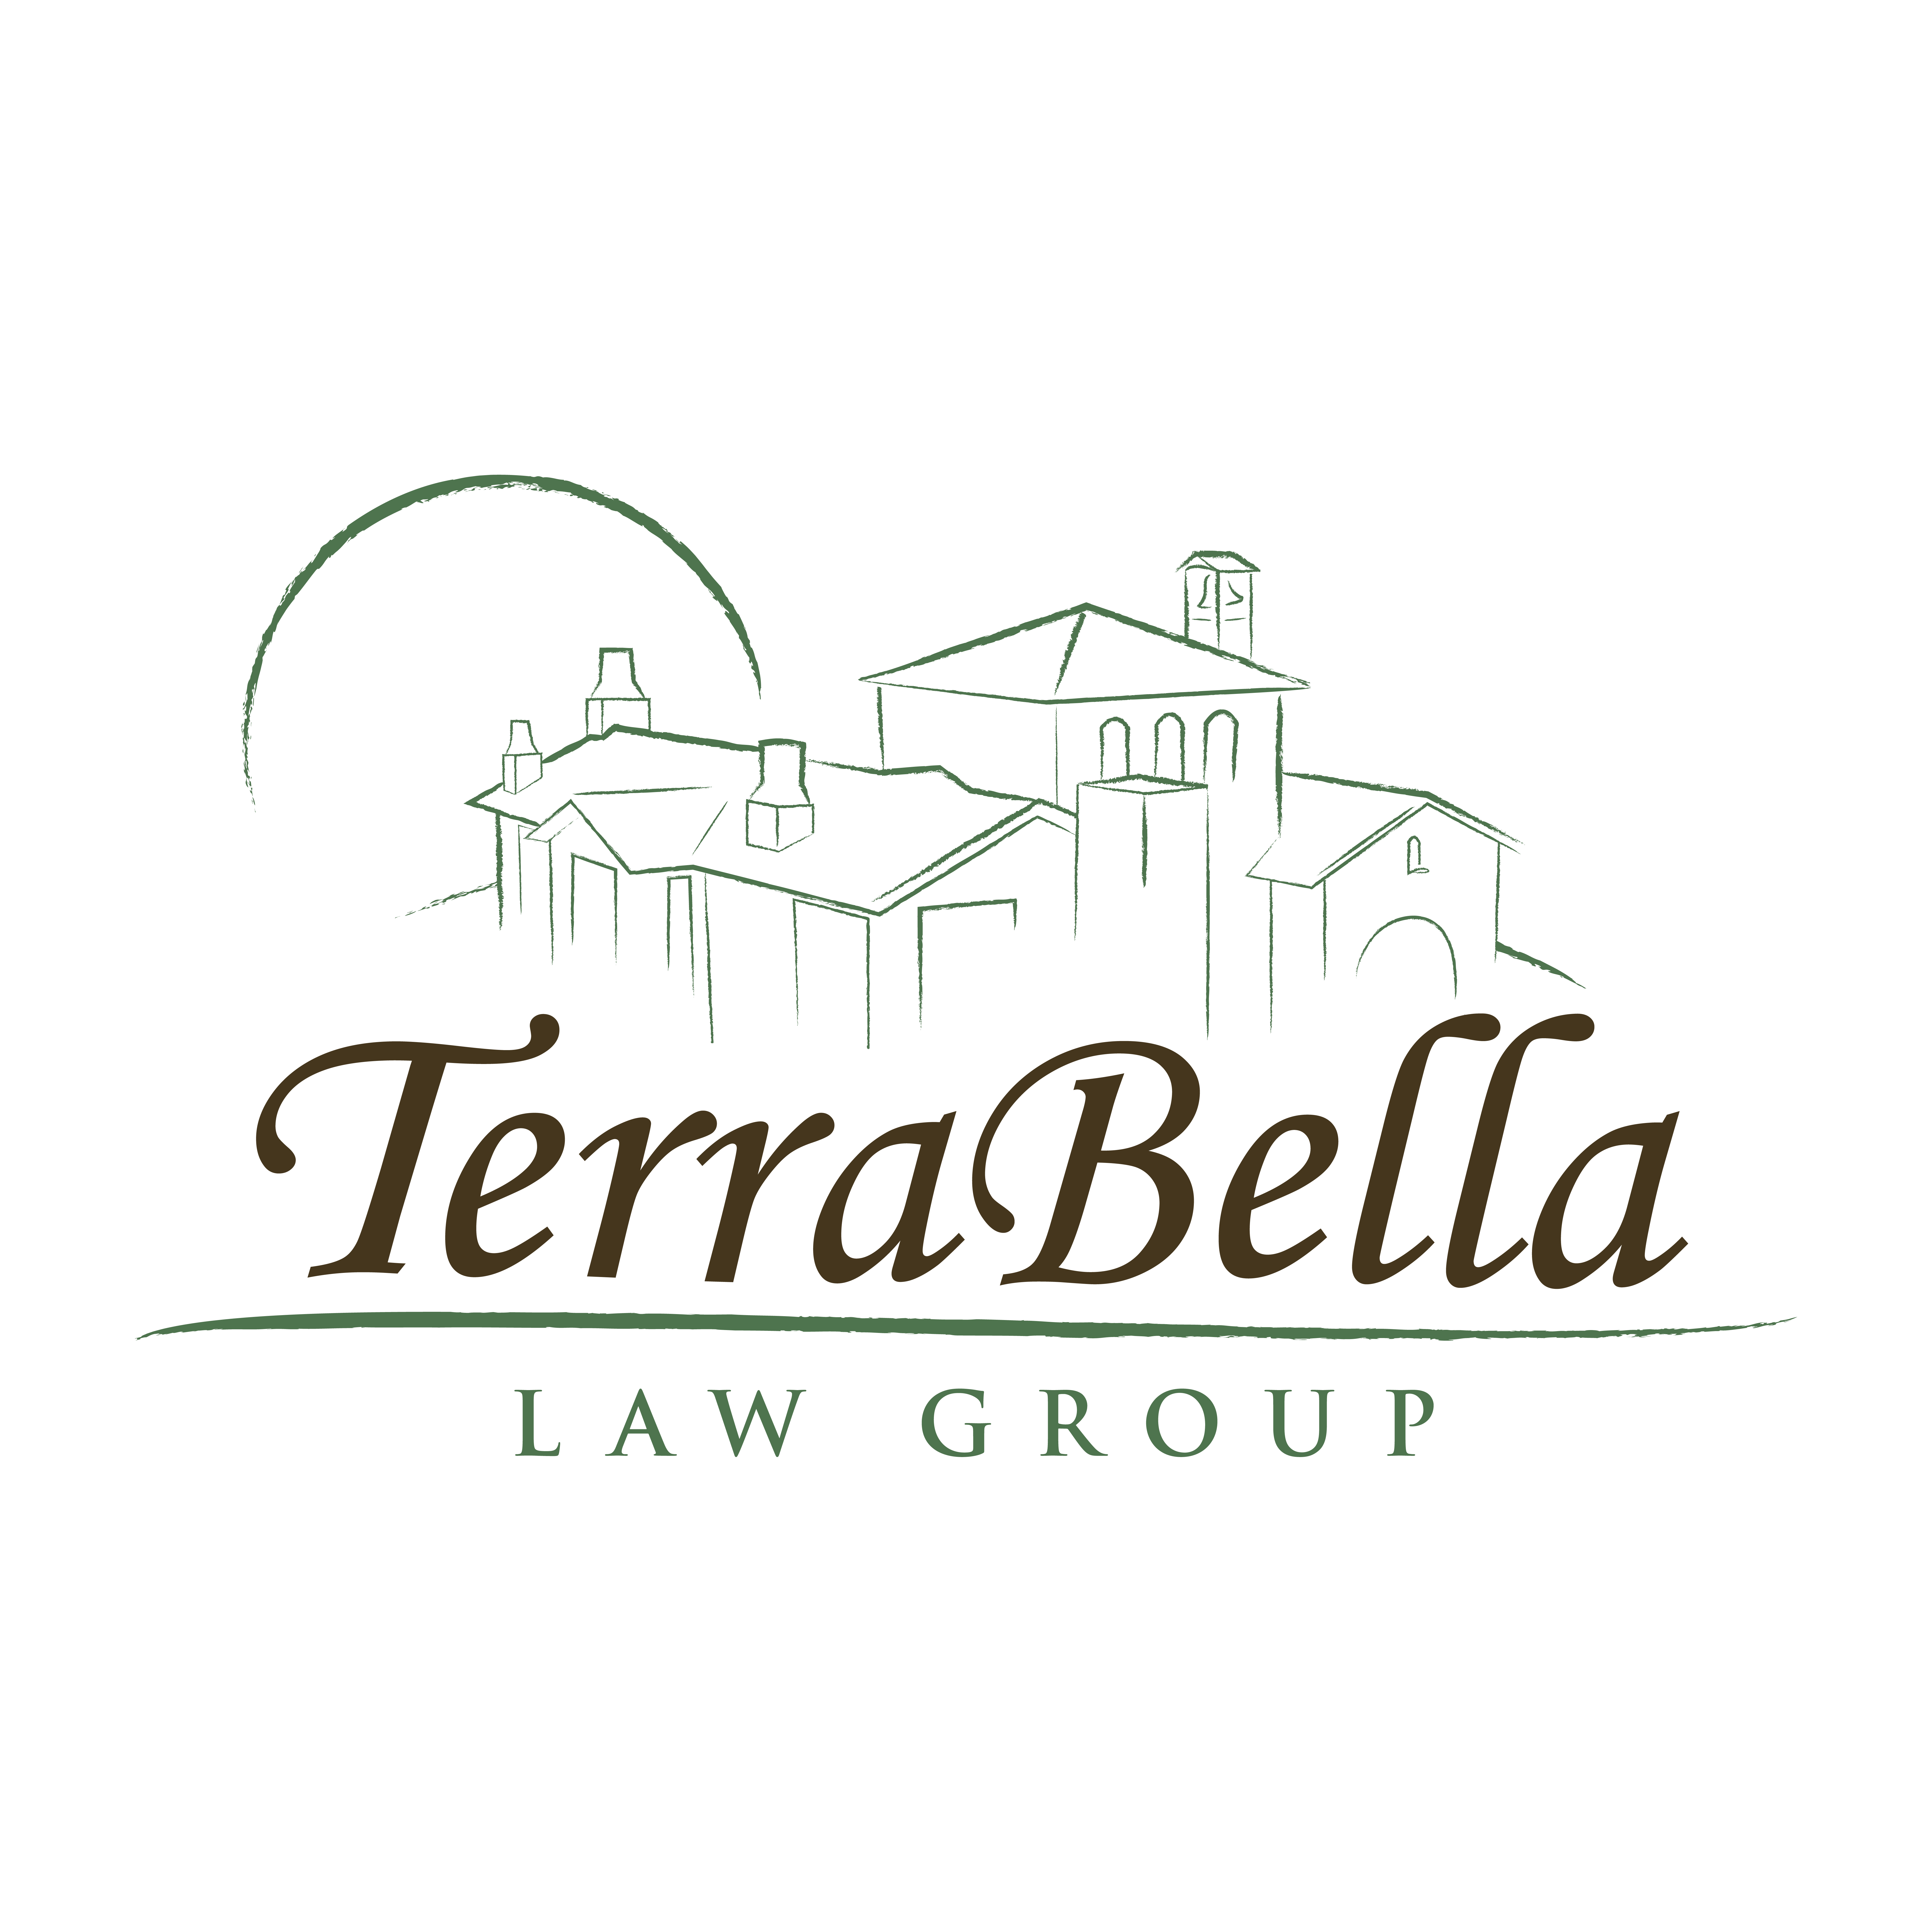 Terra Bella Law Group is owned and operated by the Law Offices of John K Hilton PLC